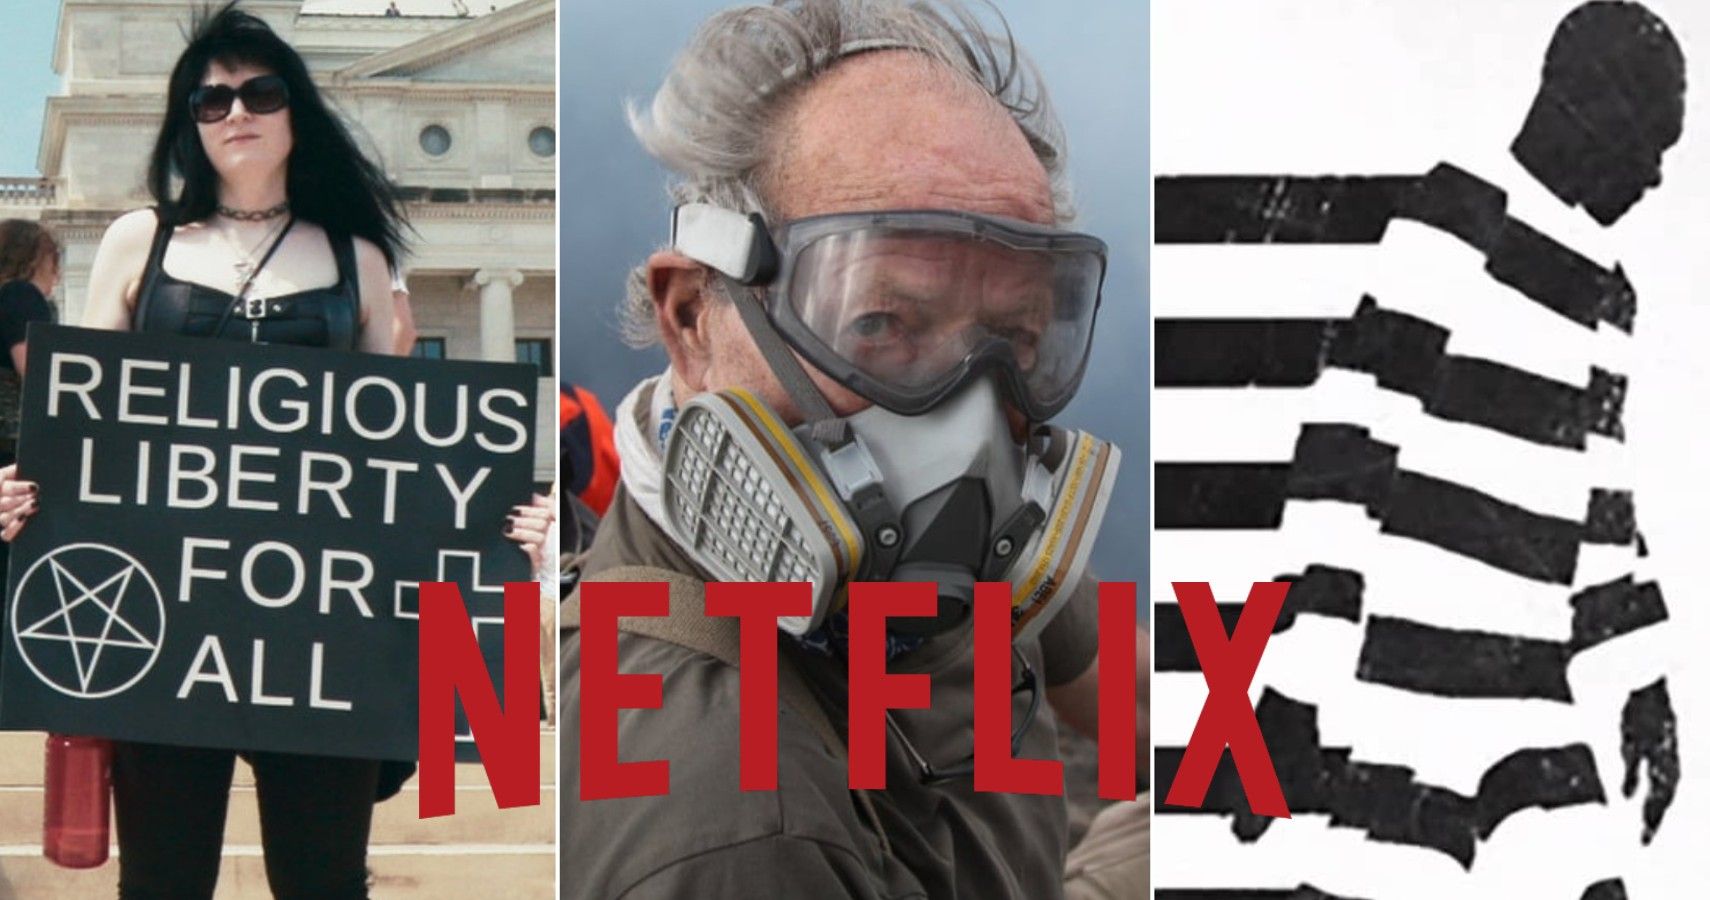 10 Great Documentaries You Can Watch on Netflix (That Aren’t True Crime)